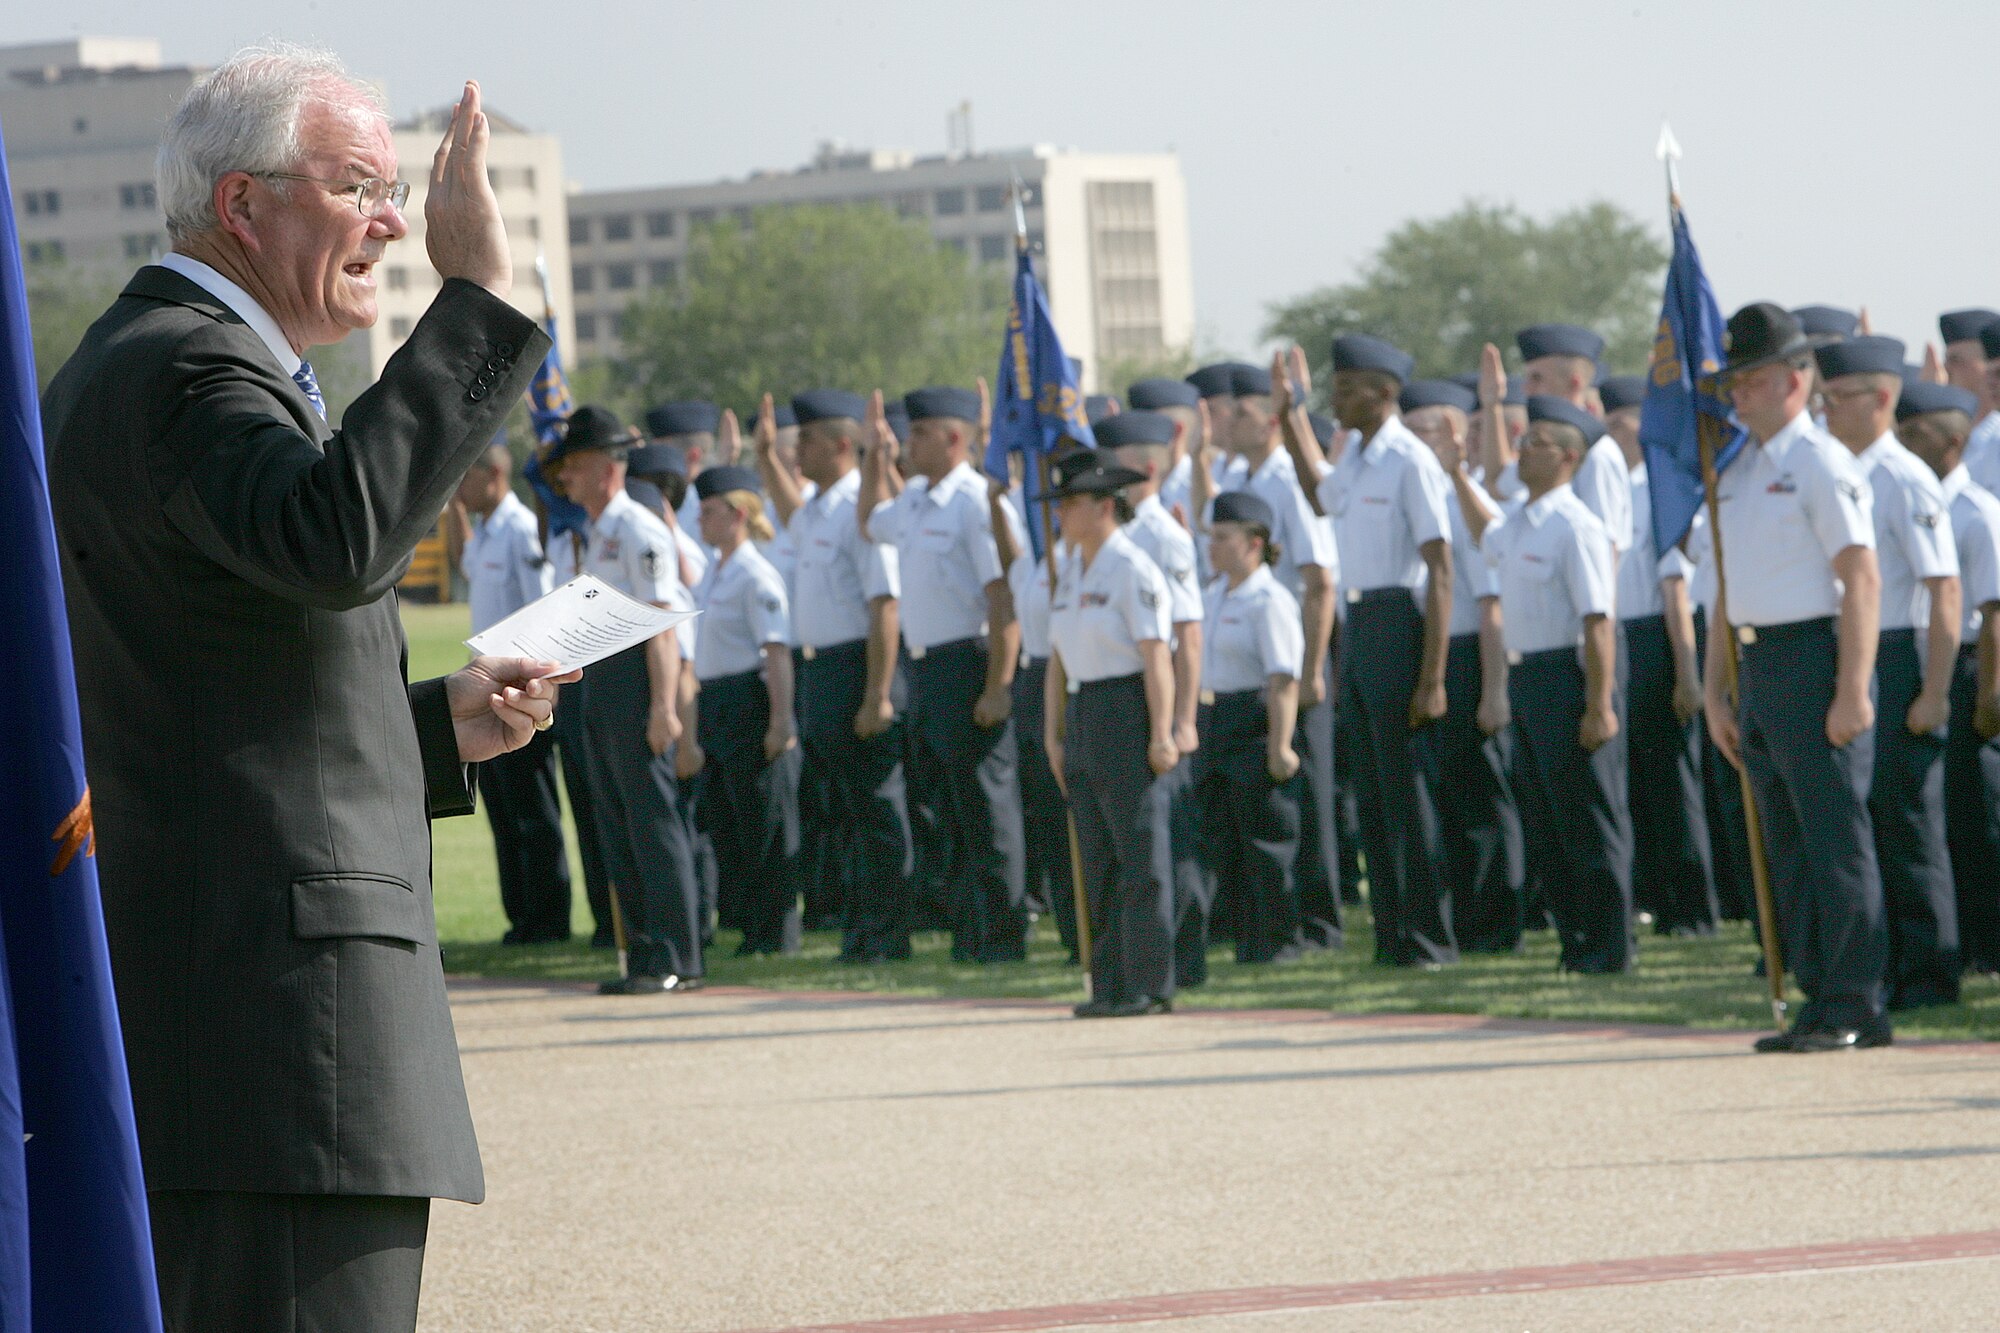 LACKLAND AIR FORCE BASE, Texas (AETCNS) -- Secretary of the Air Force Michael Wynne gives the Oath of Enlistment to newly graduated Airmen at a Basic Military Training graduation parade here June 2. In addition to reviewing the parade, Secretary Wynne also observed a culmination exercise at Lackland’s Field Training Site and toured a Basic Military Training dormitory.